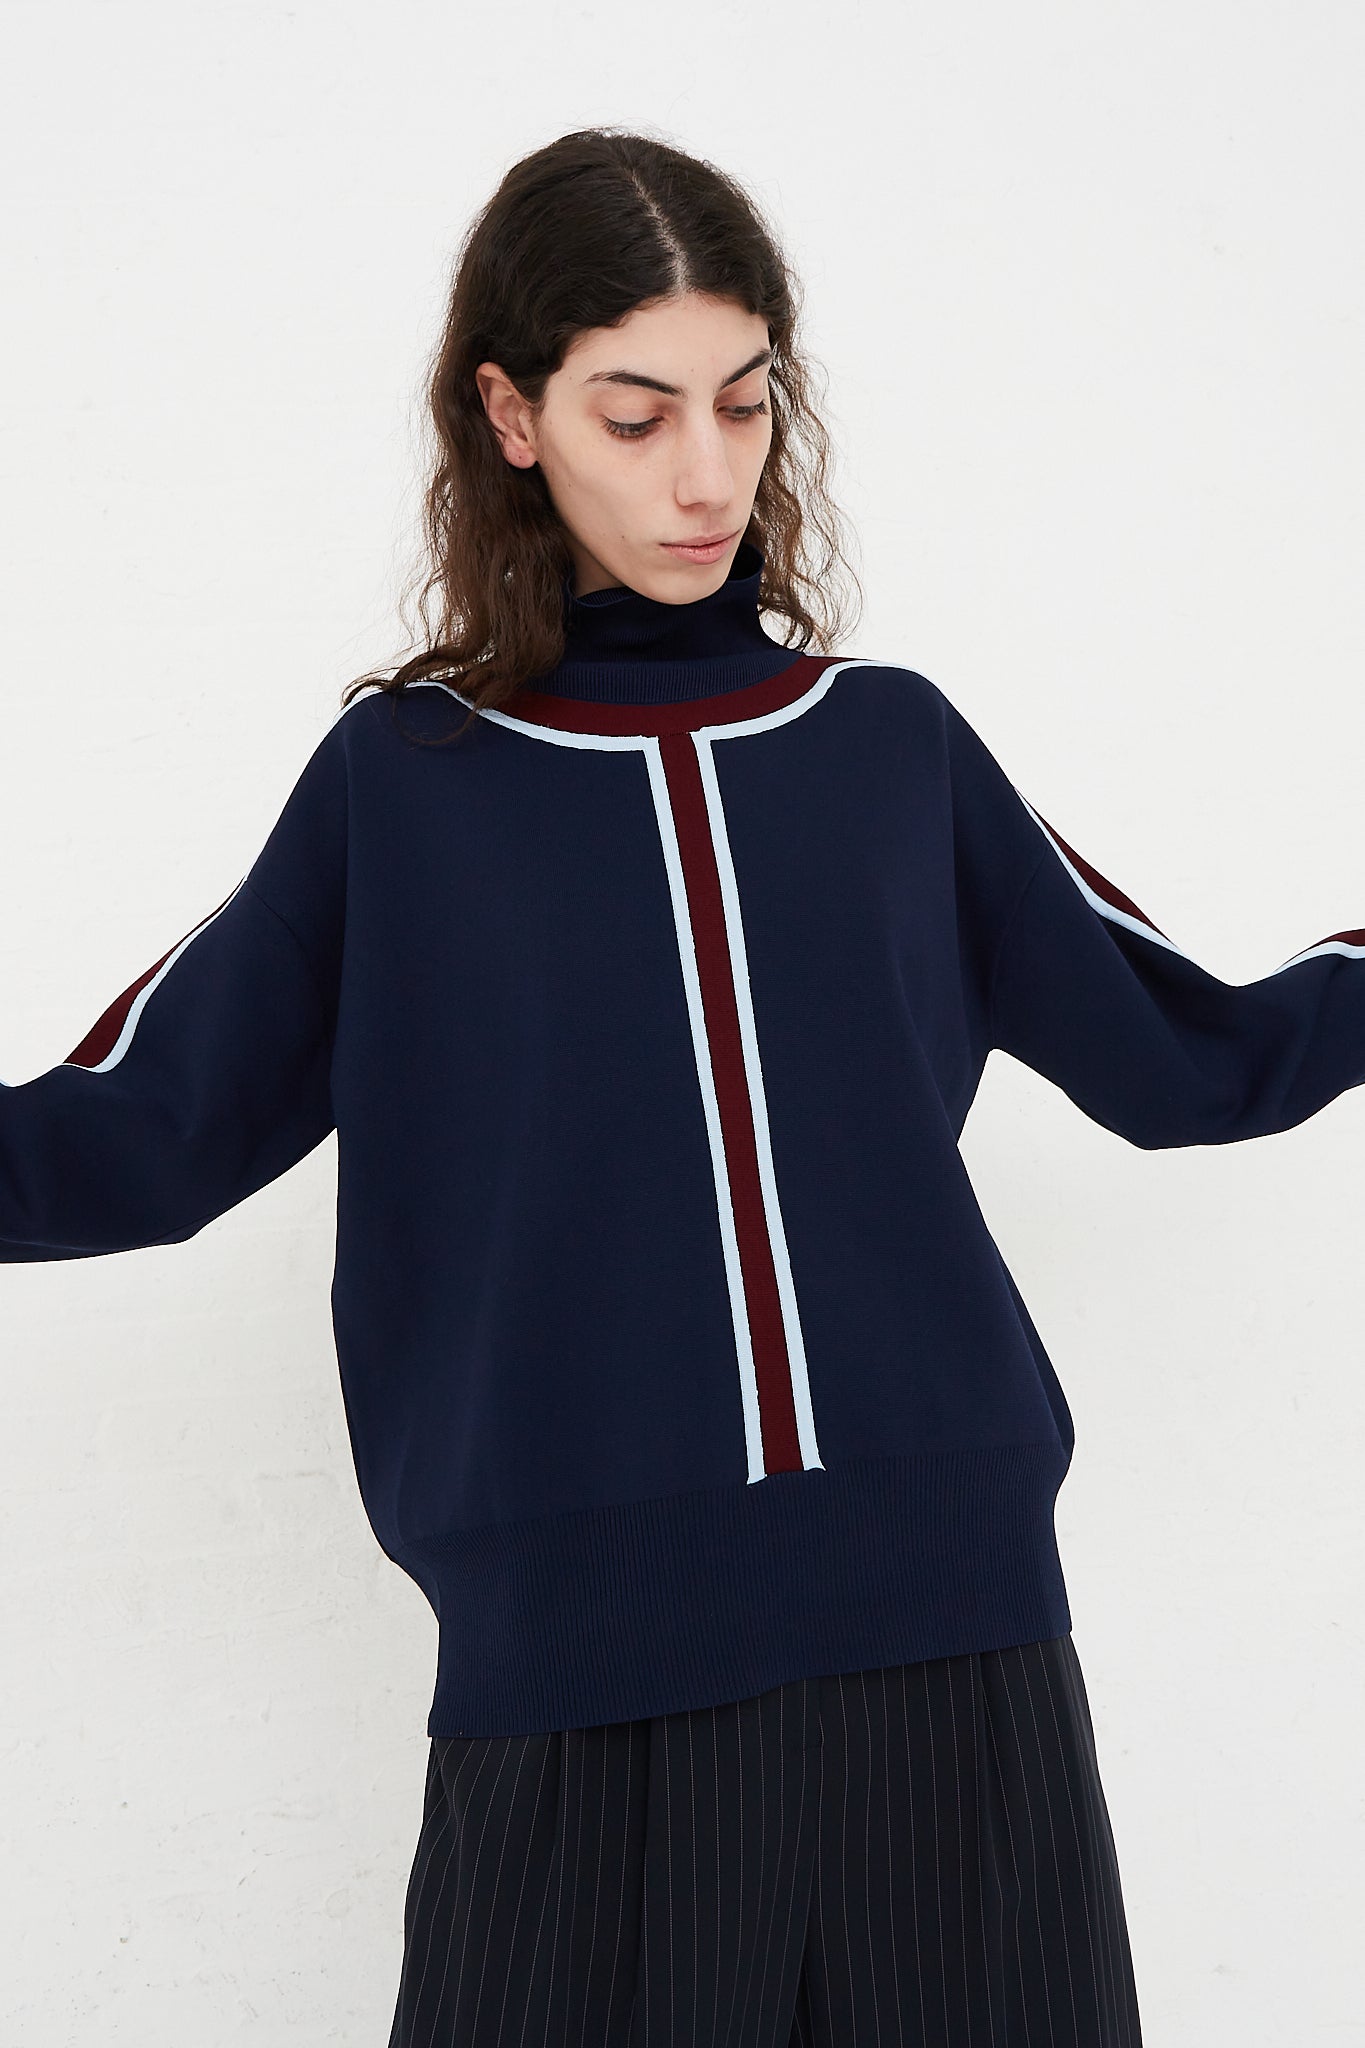 A model wearing a Track Stripe Mockneck Sweater in Midnight designed by Nomia brand.